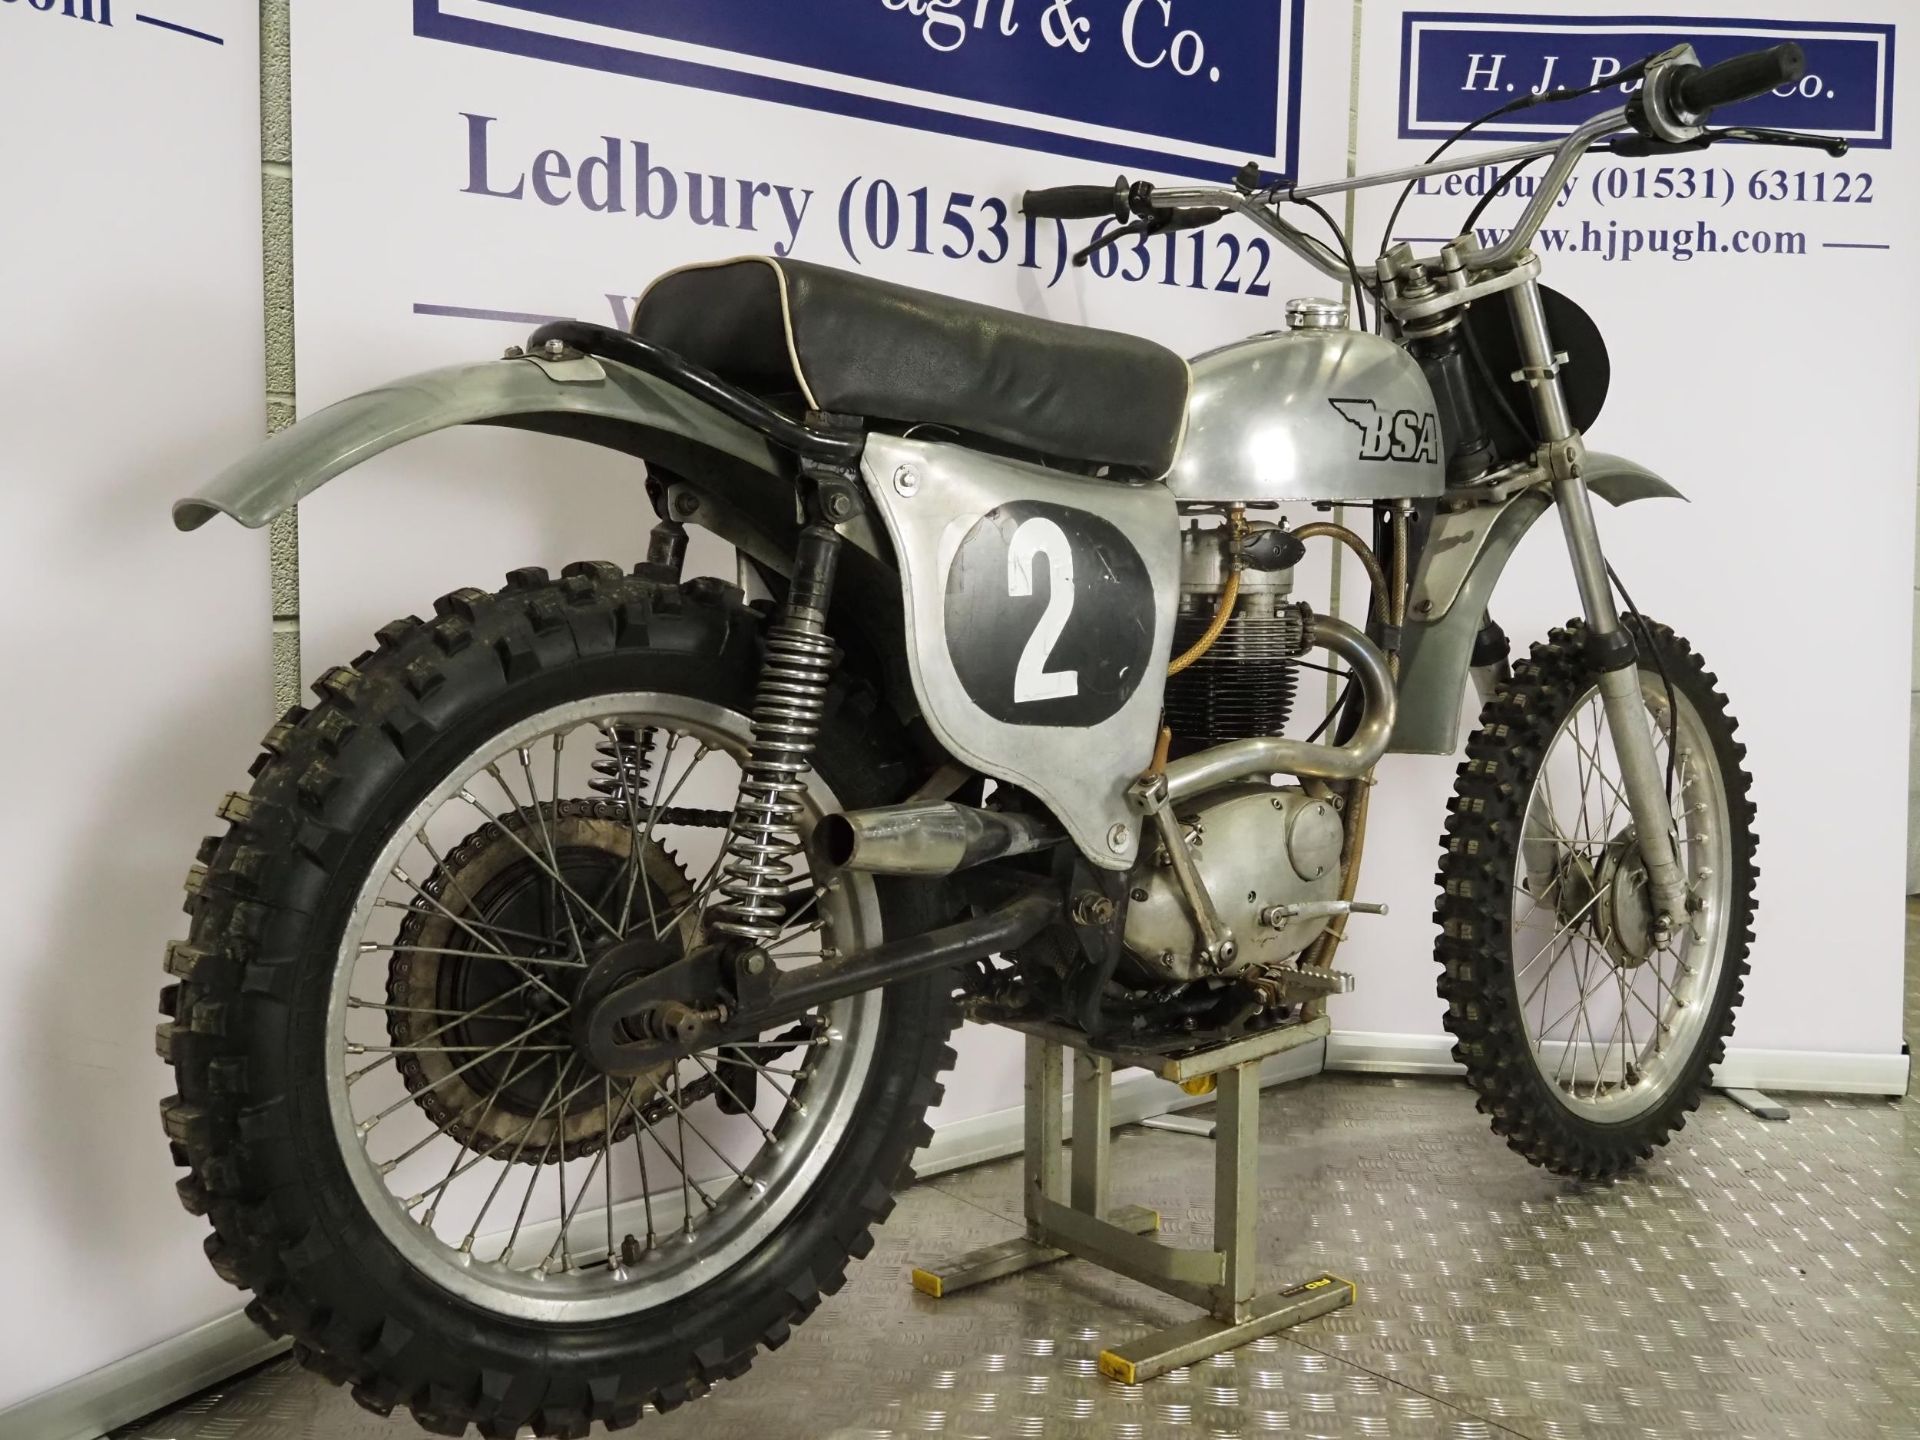 BSA Walker Victor trials motorcycle. 441cc Engine turns over. Has been dry stored for many years. - Image 3 of 7